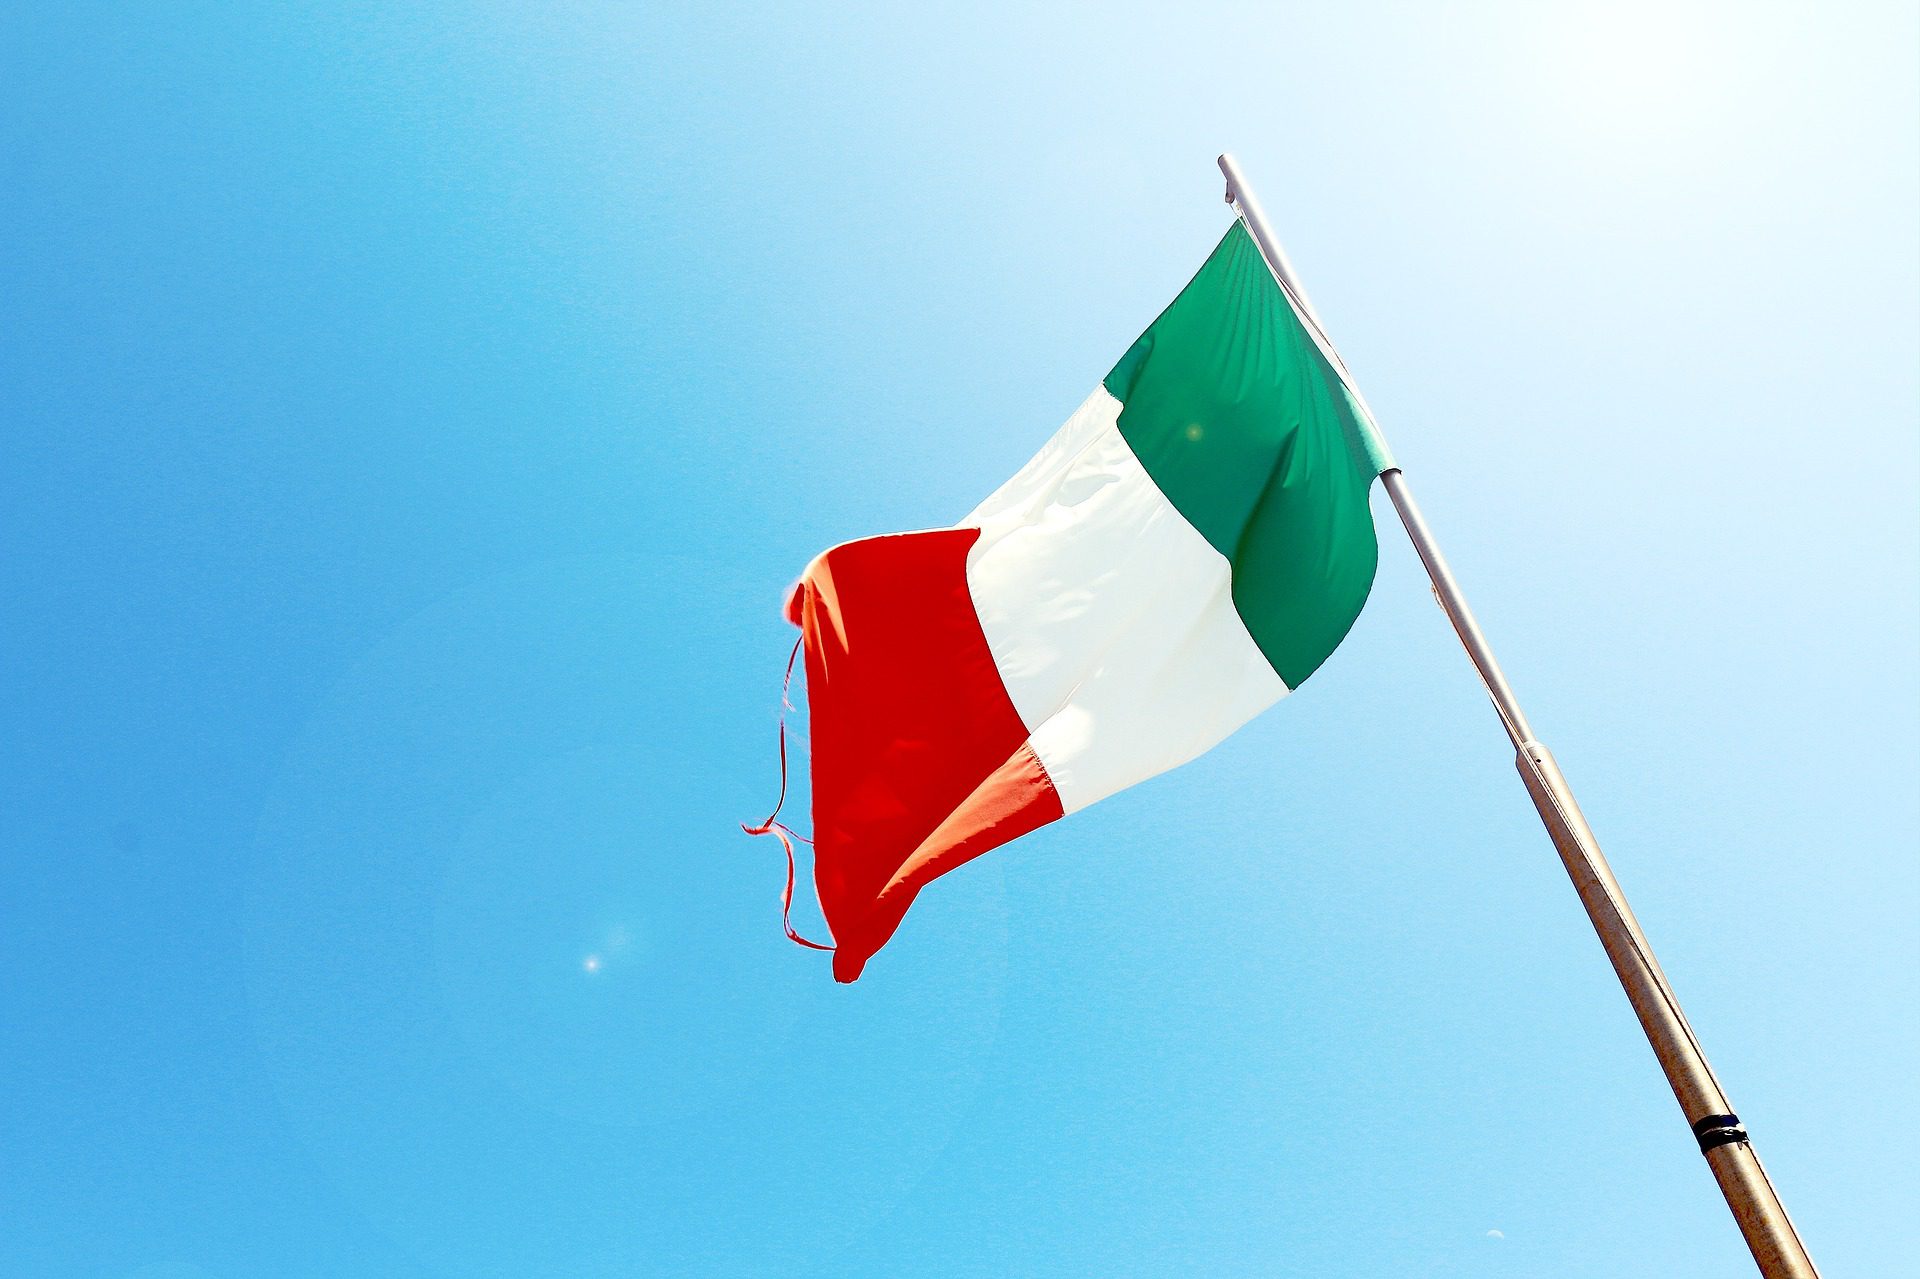 Medicinal, recreational and light cannabis, find out which are legal in Italy